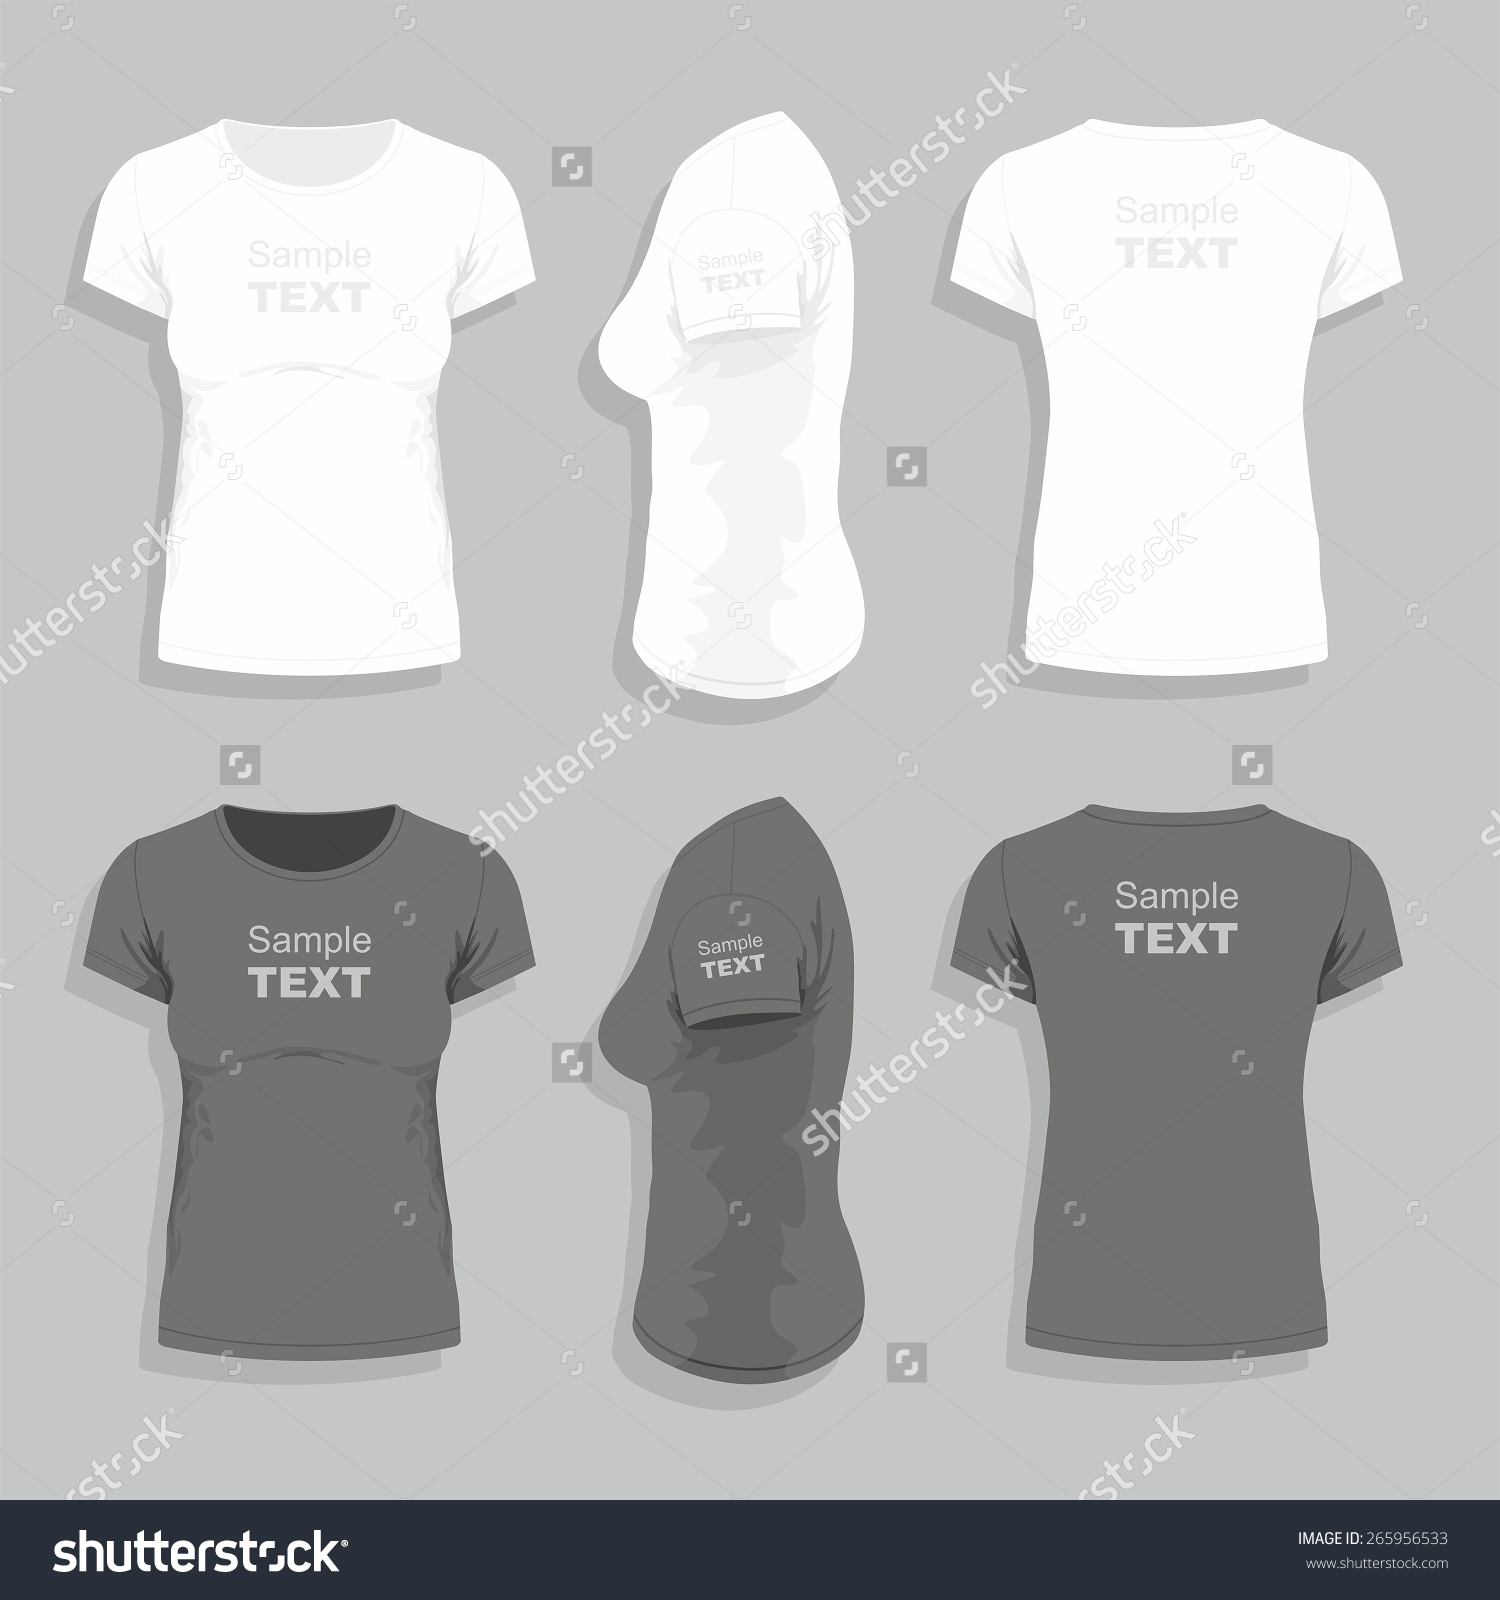 ShutterStock Vector T-Shirts for College